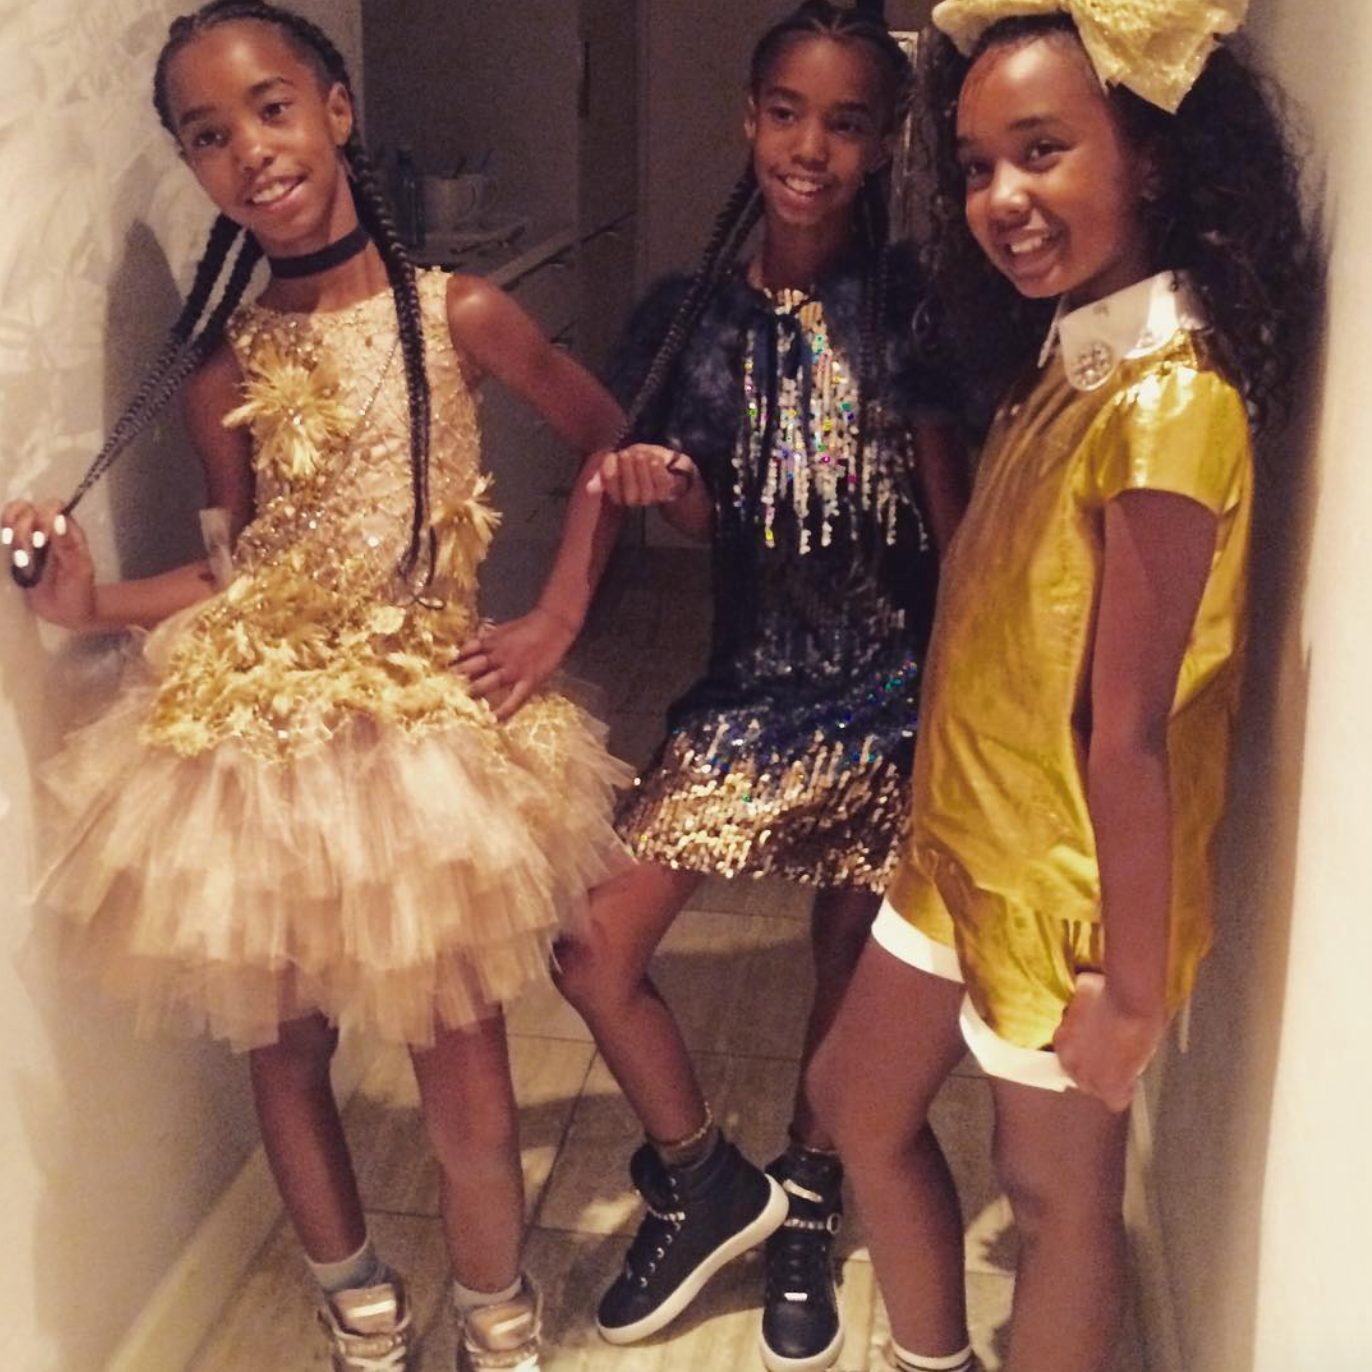 Diddy And His Darling Daughters Will Make Your Heart Smile
